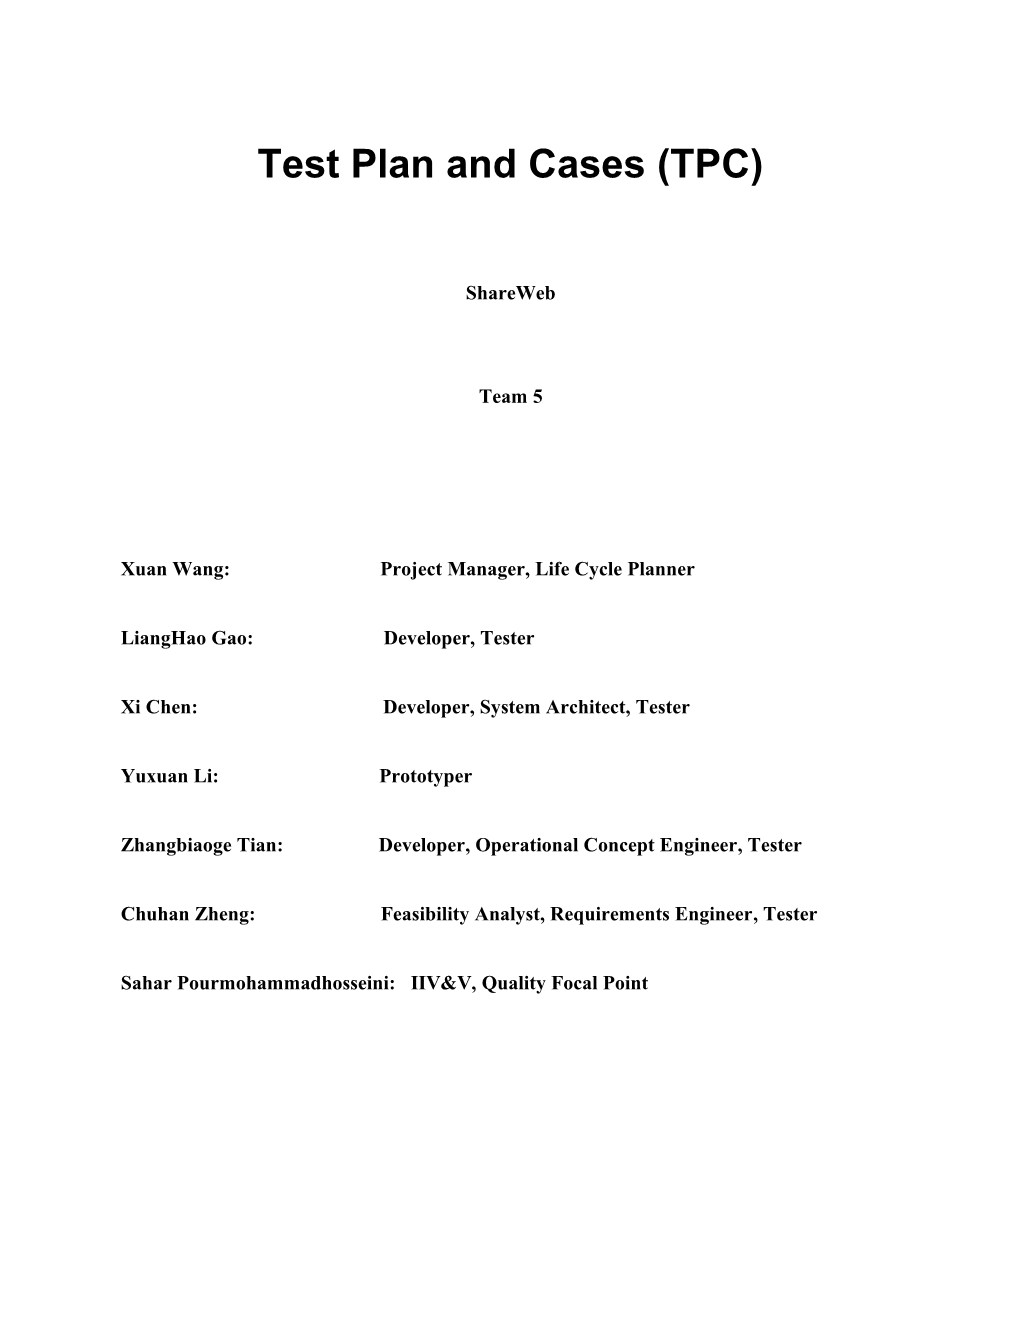 Test Plan and Cases (TPC) s5